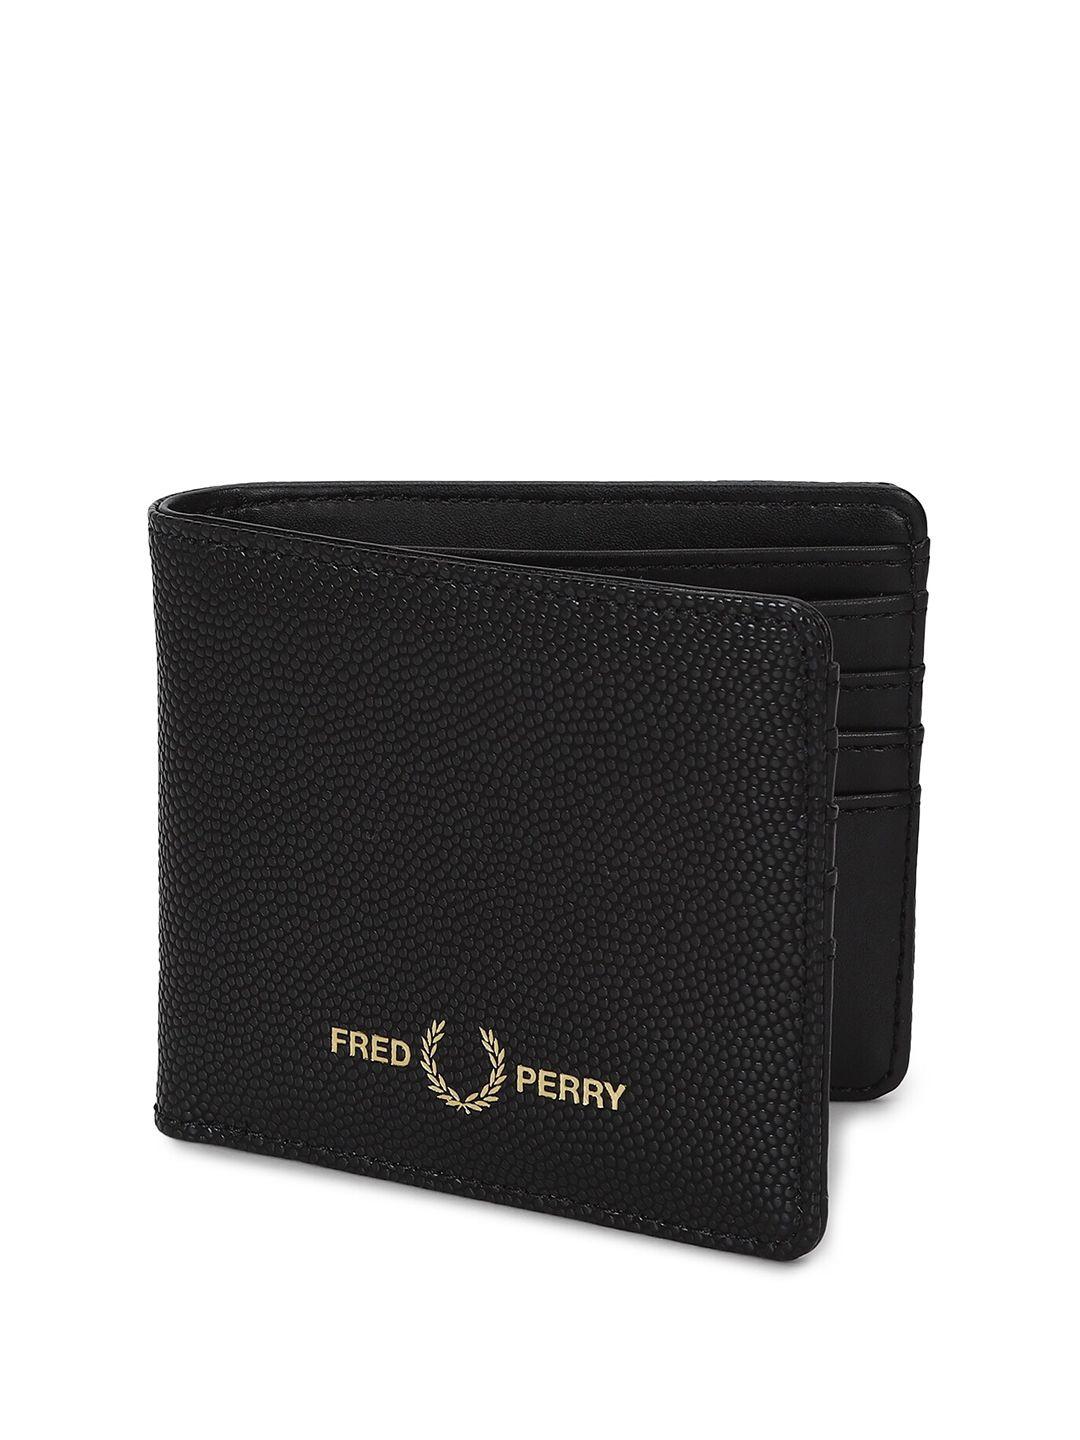 fred perry men textured two fold wallet